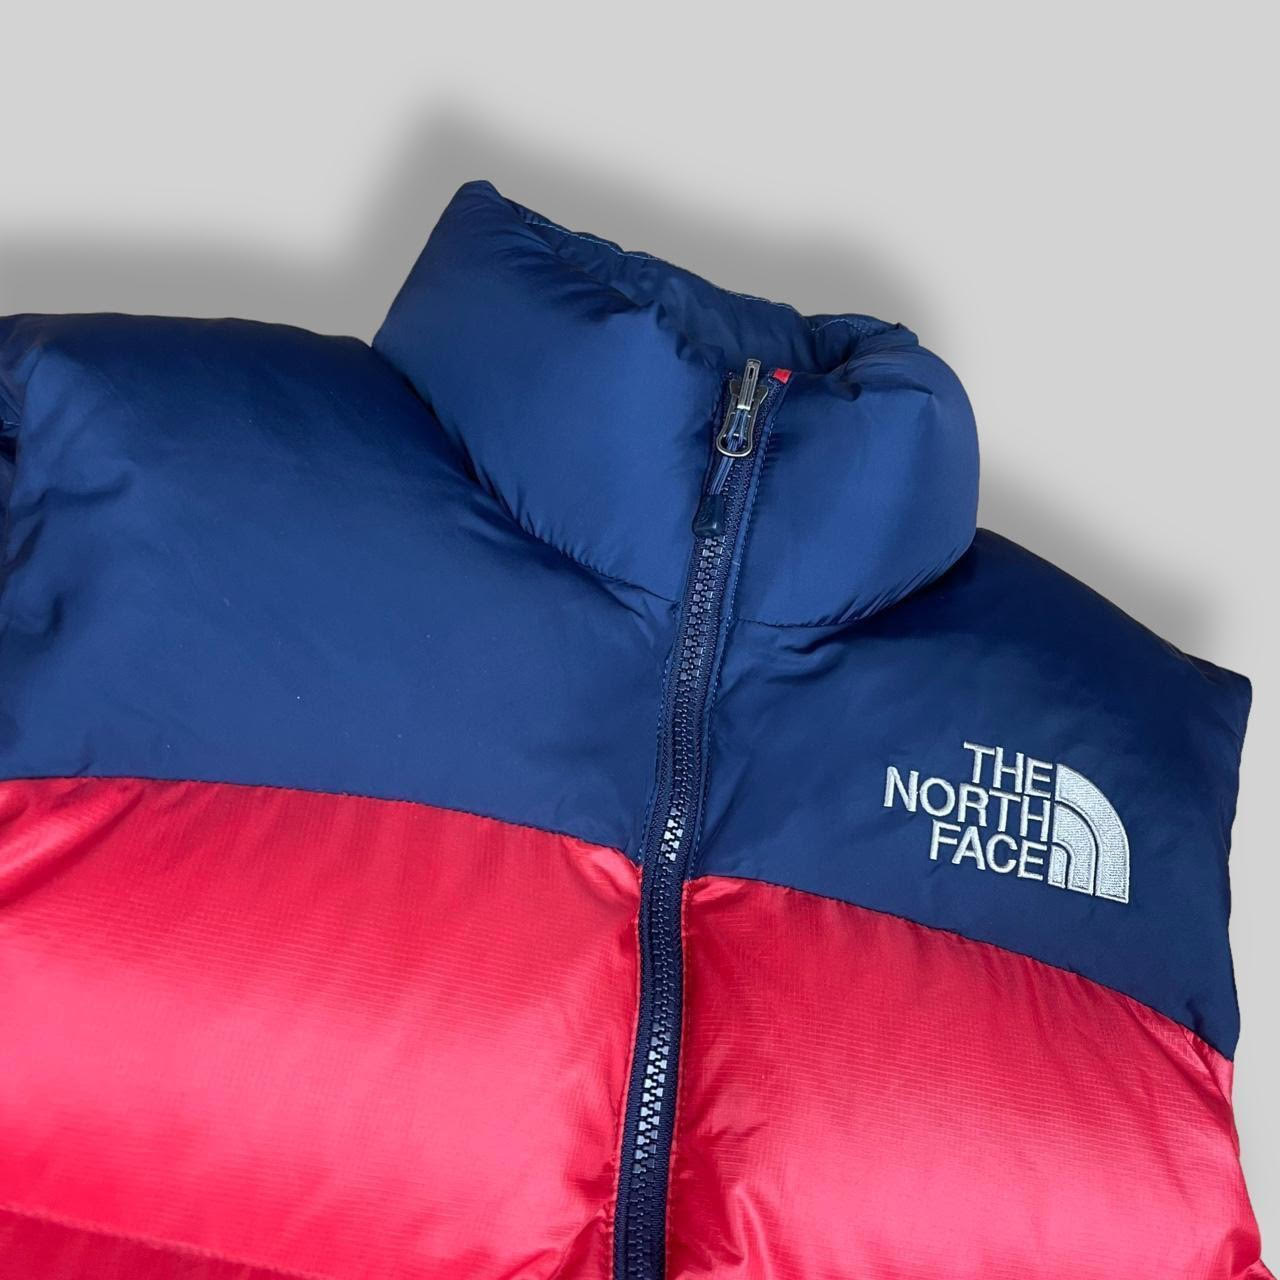 The North Face 700 Gilet Puffer (XS)